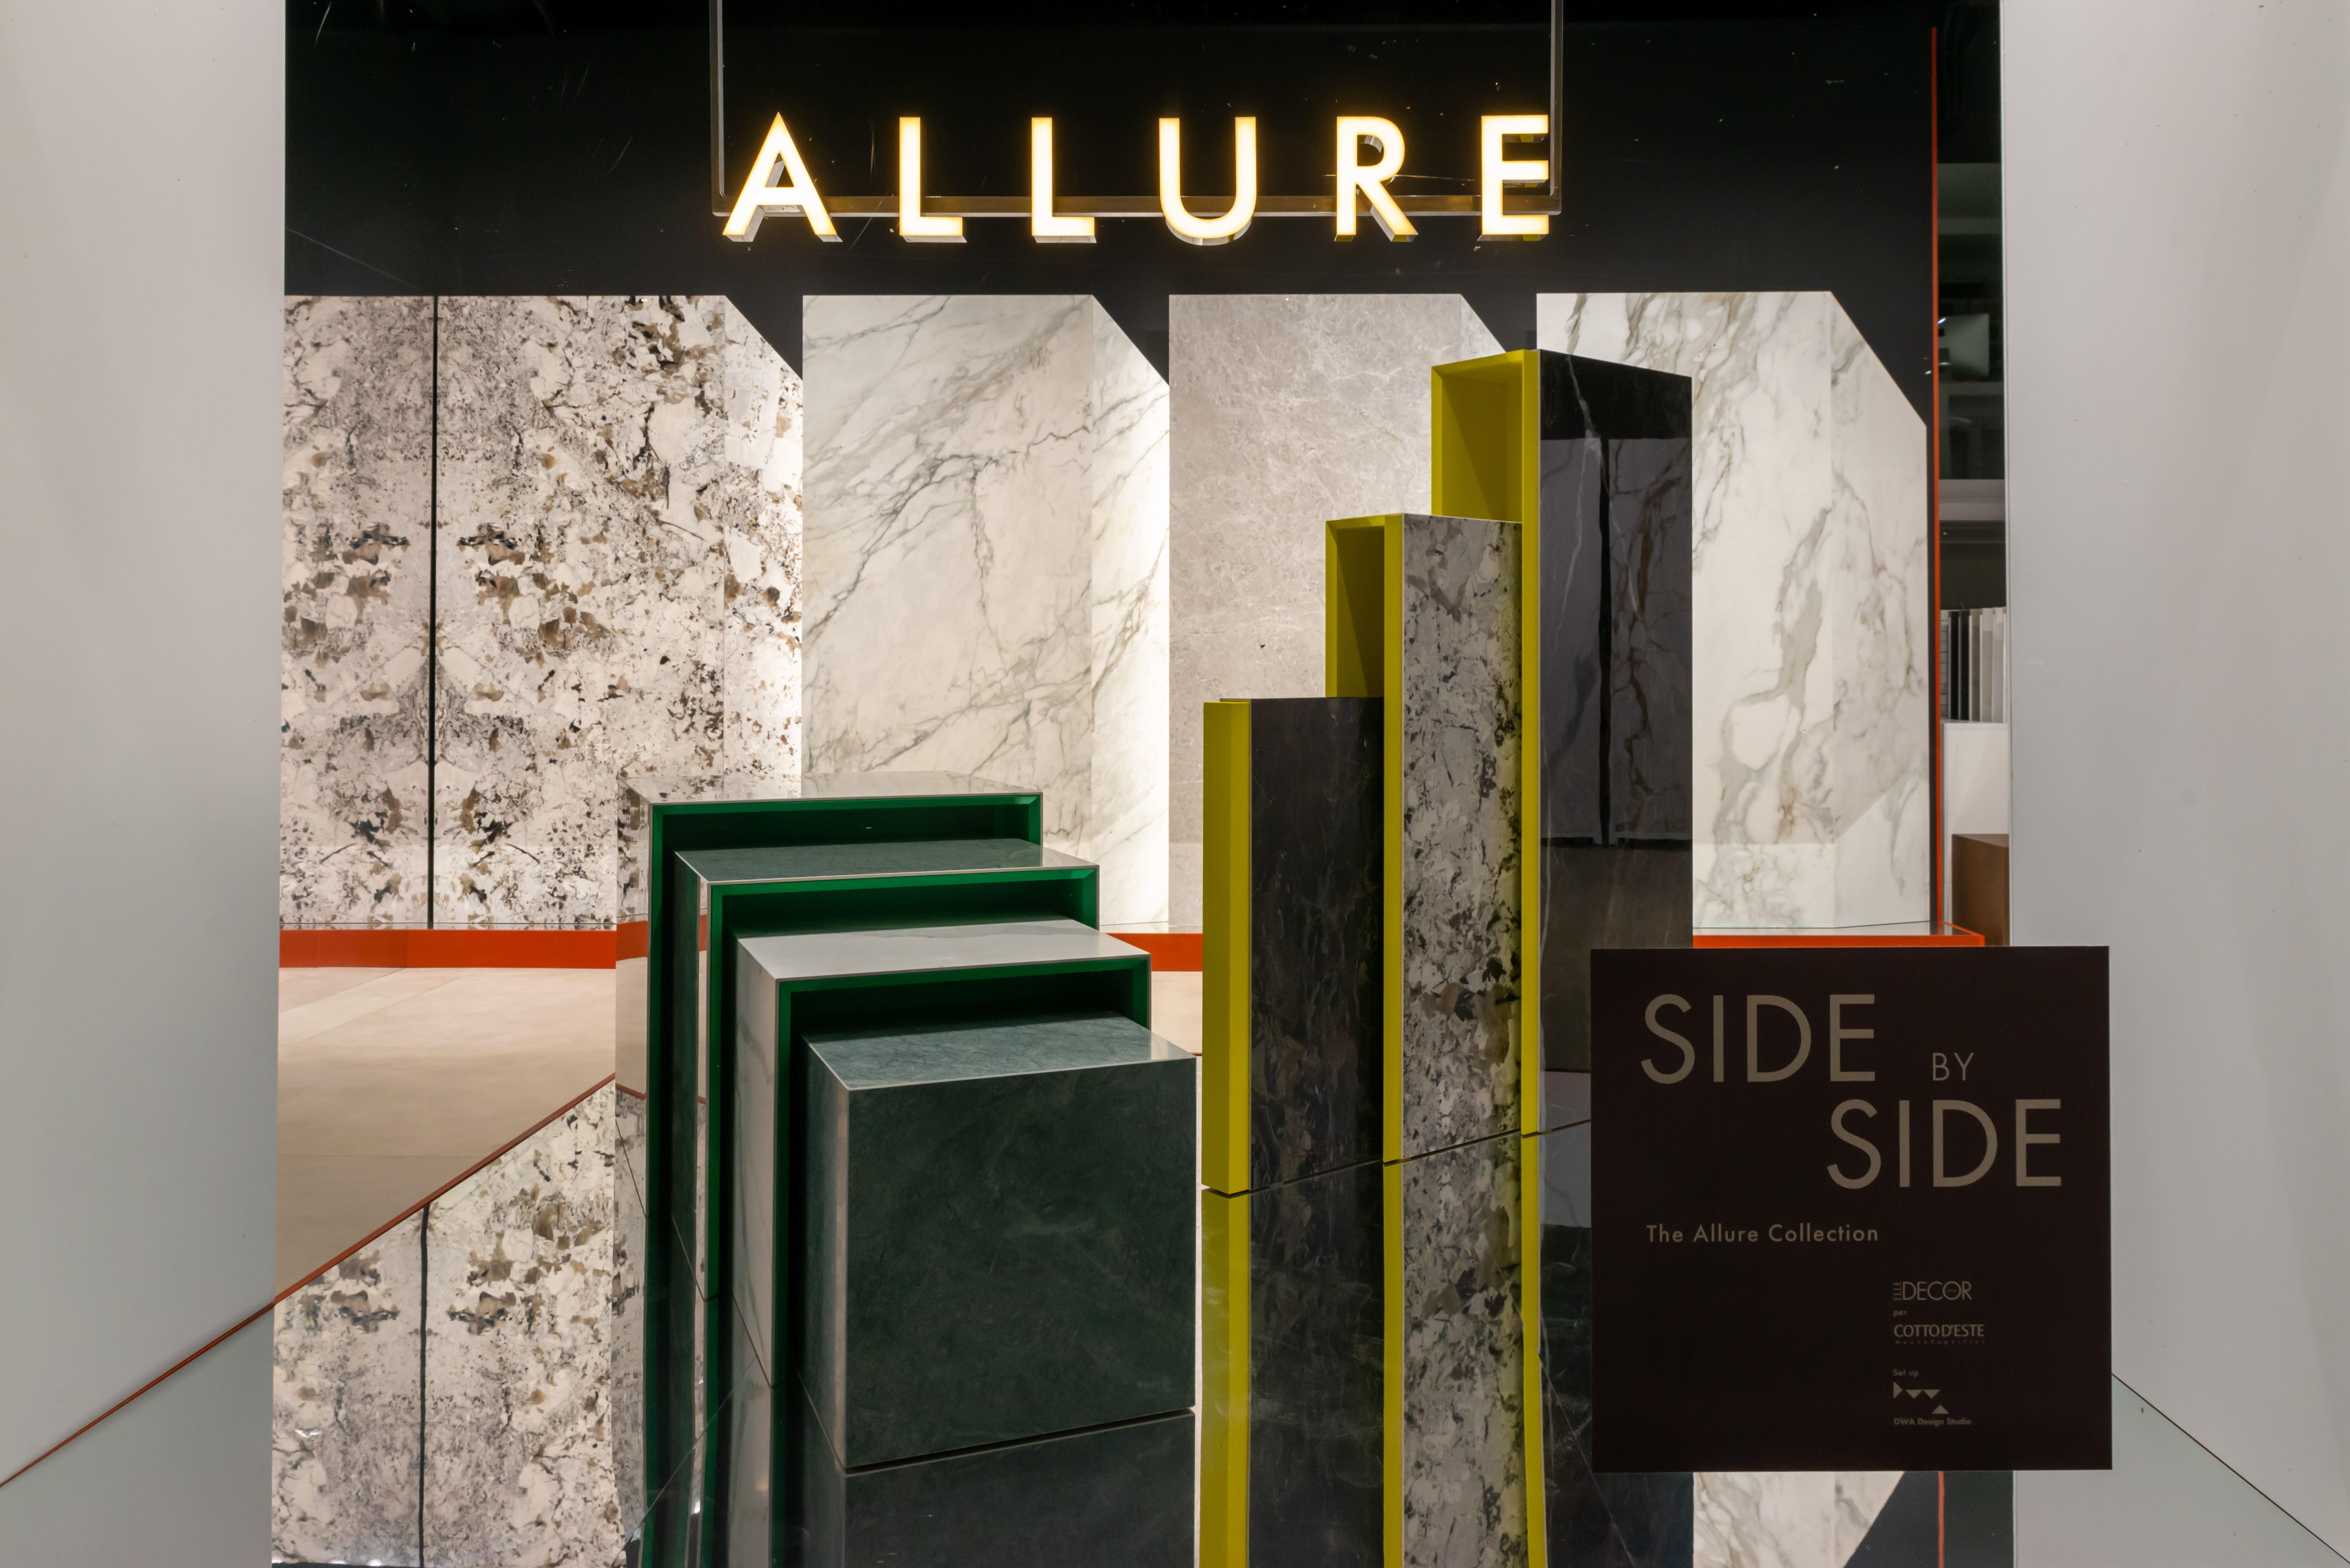 Side by side: the Allure collection: Photo 7